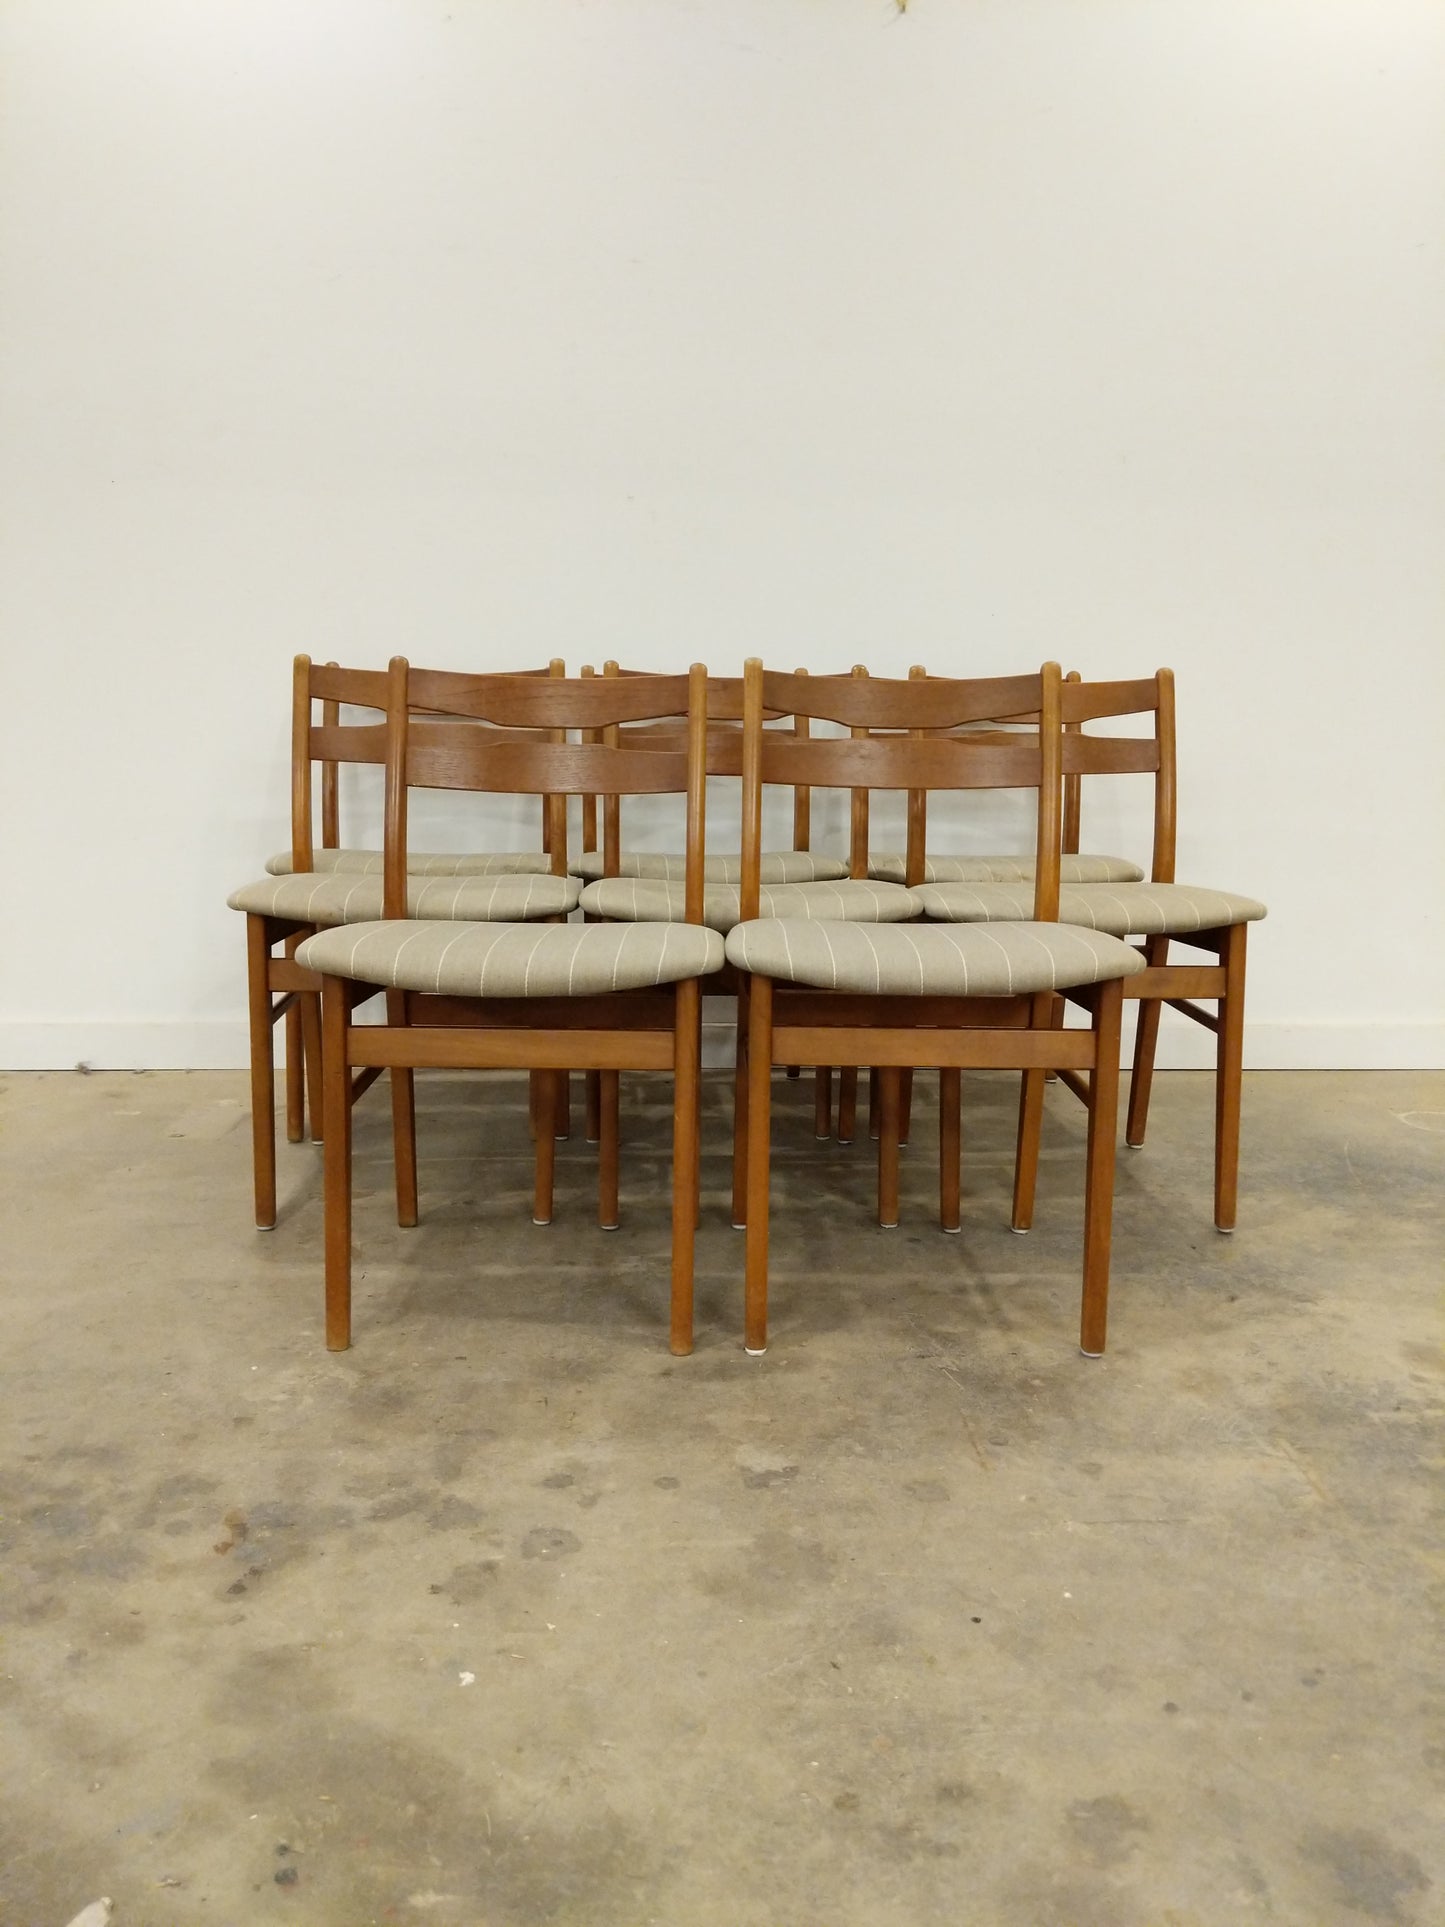 Set of 8 Vintage Danish Modern Dining Chairs